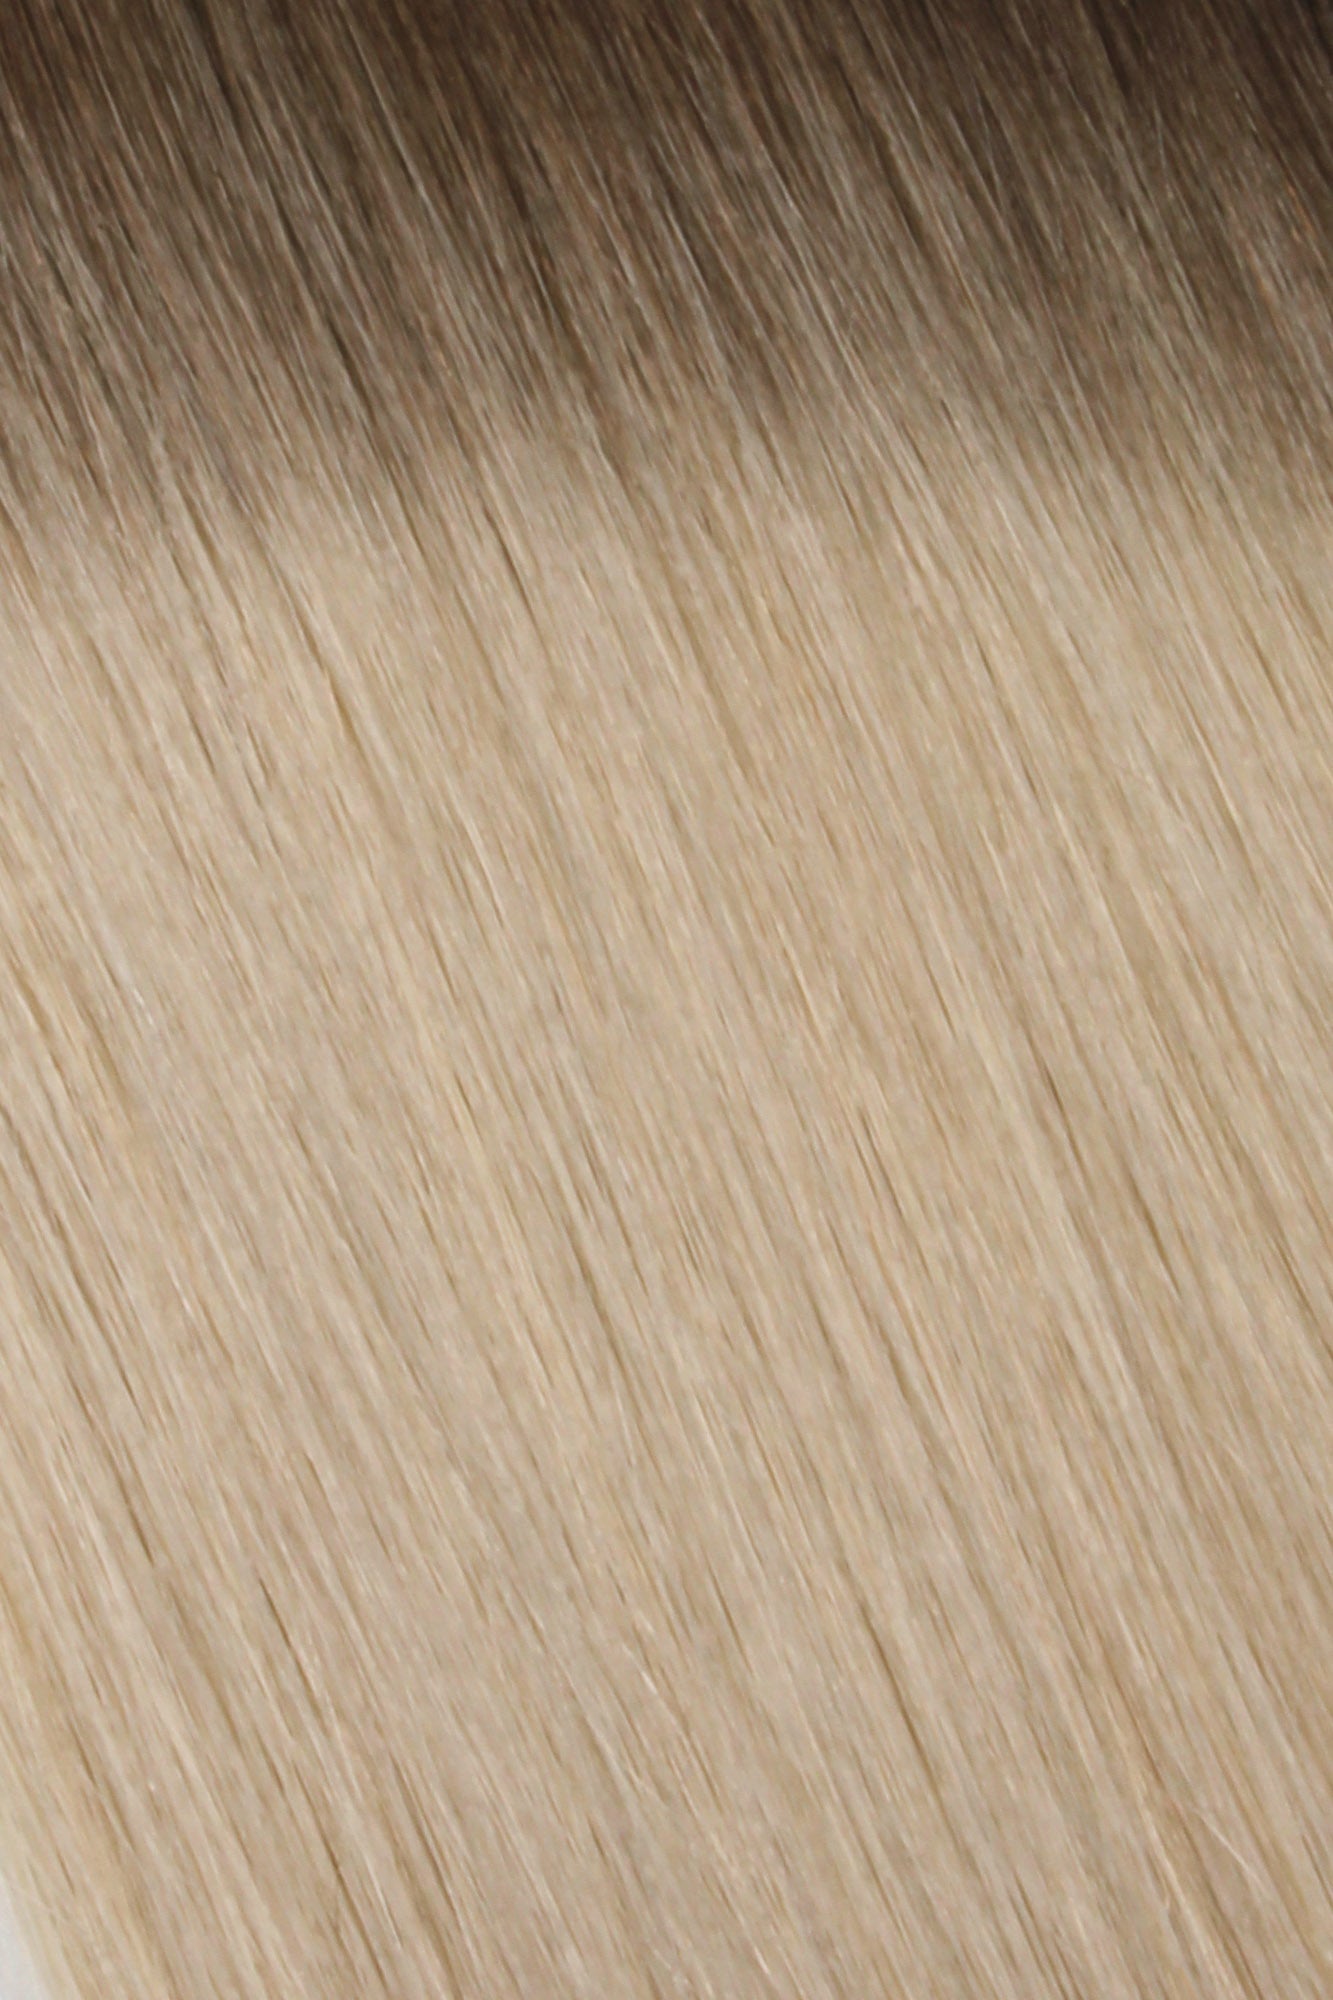 SEAMLESS® Flat Weft 16 Inches - SWAY Hair Extensions Rooted-Hollywood-Ash-Blonde-R5-18A-613A Natural SEAMLESS® Flat Weft 16 Inches extensions. Thin, flexible, and discreet. 100% Double Drawn Remy Human Hair. Versatile and reusable